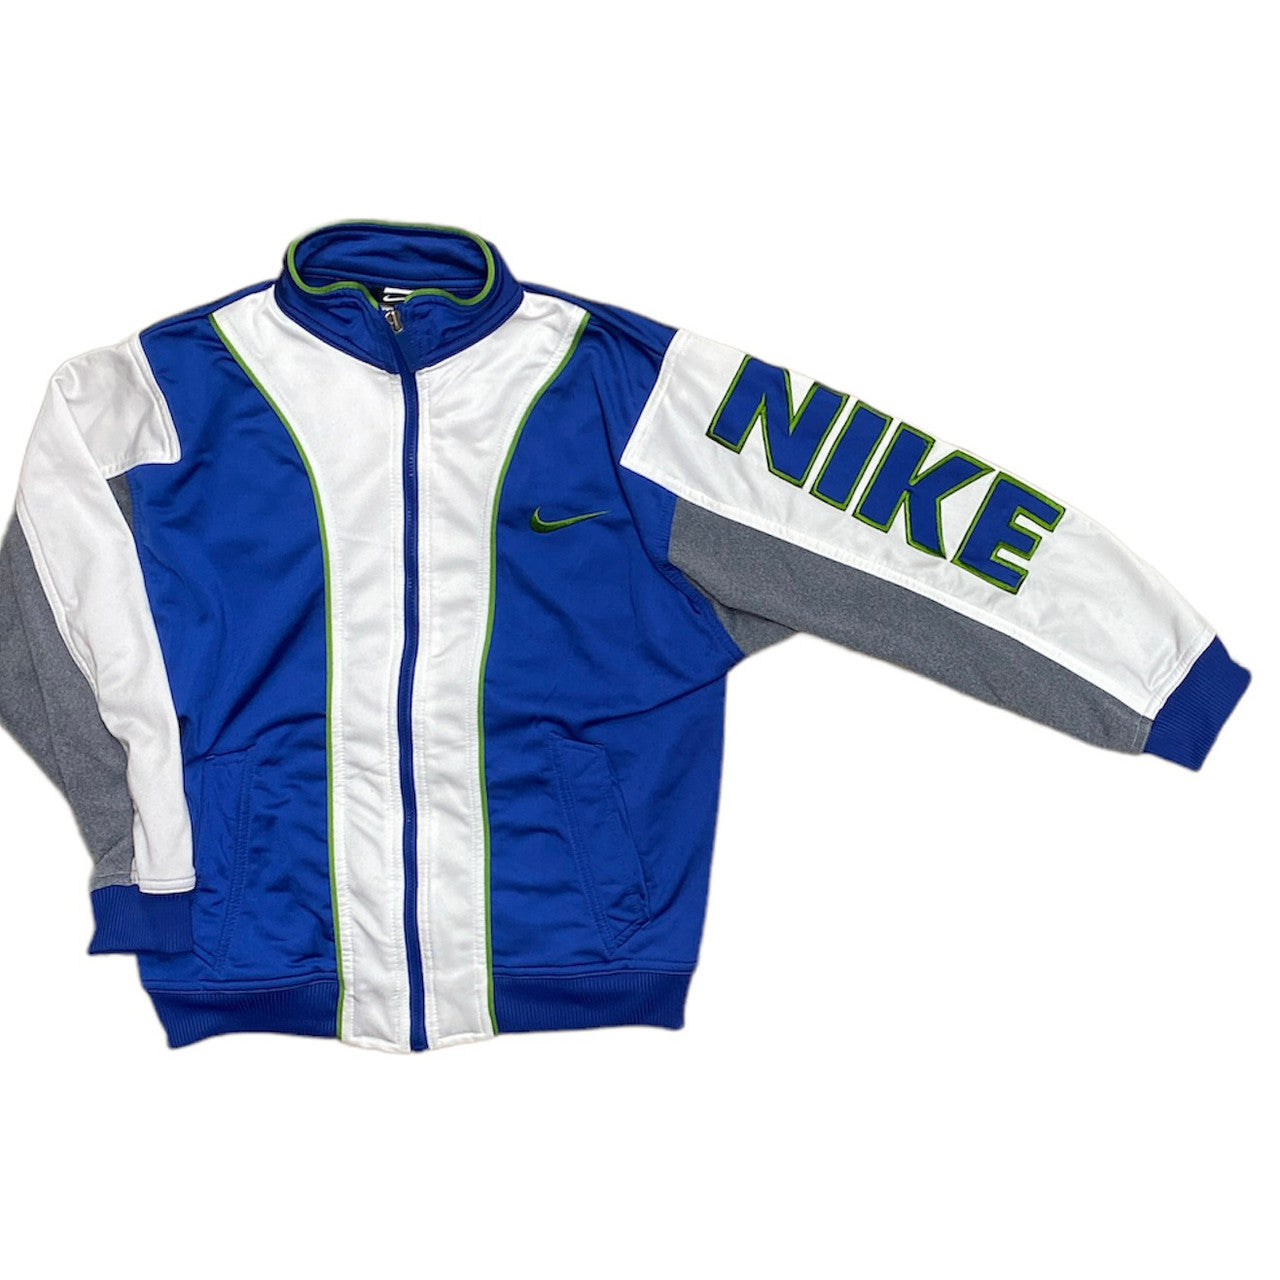 Vintage Nike Blue White Track Top (Youth)